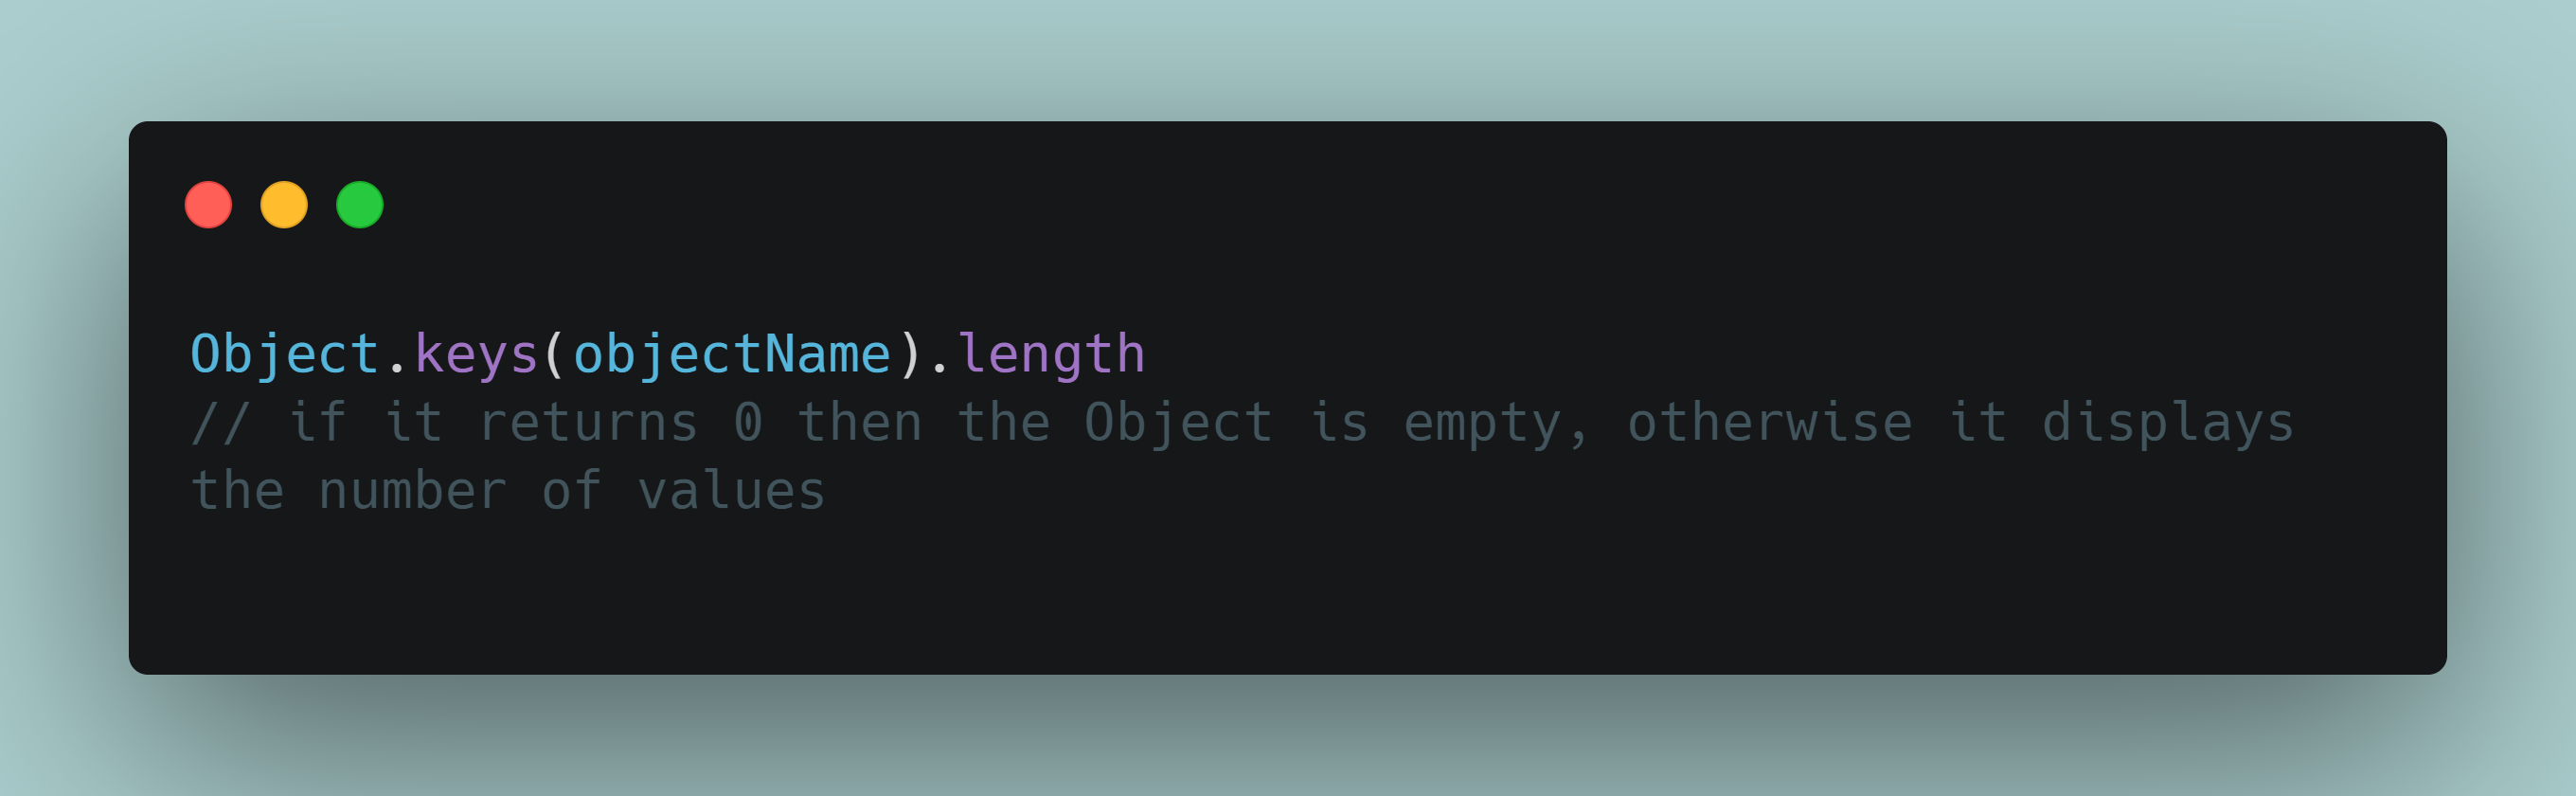 objectlength.png